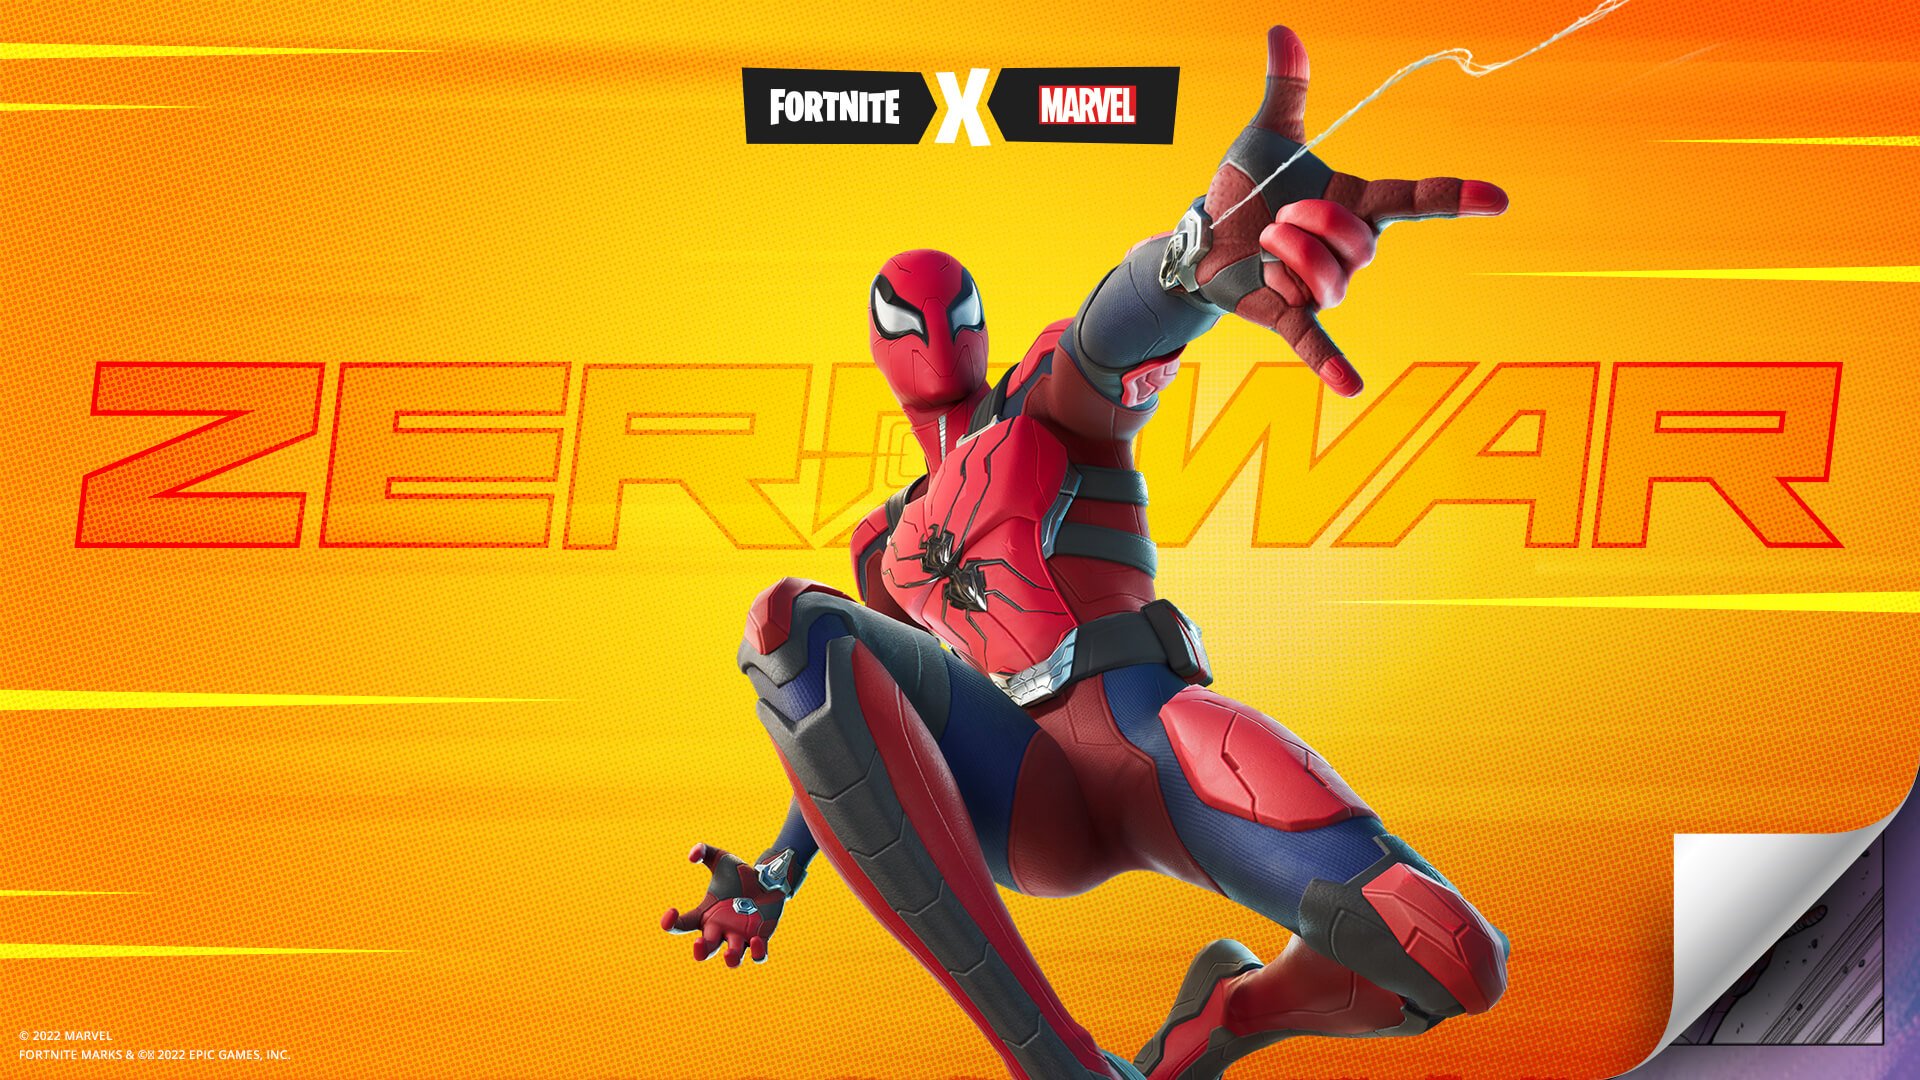 How to get the Fortnite Spider-Man Zero outfit